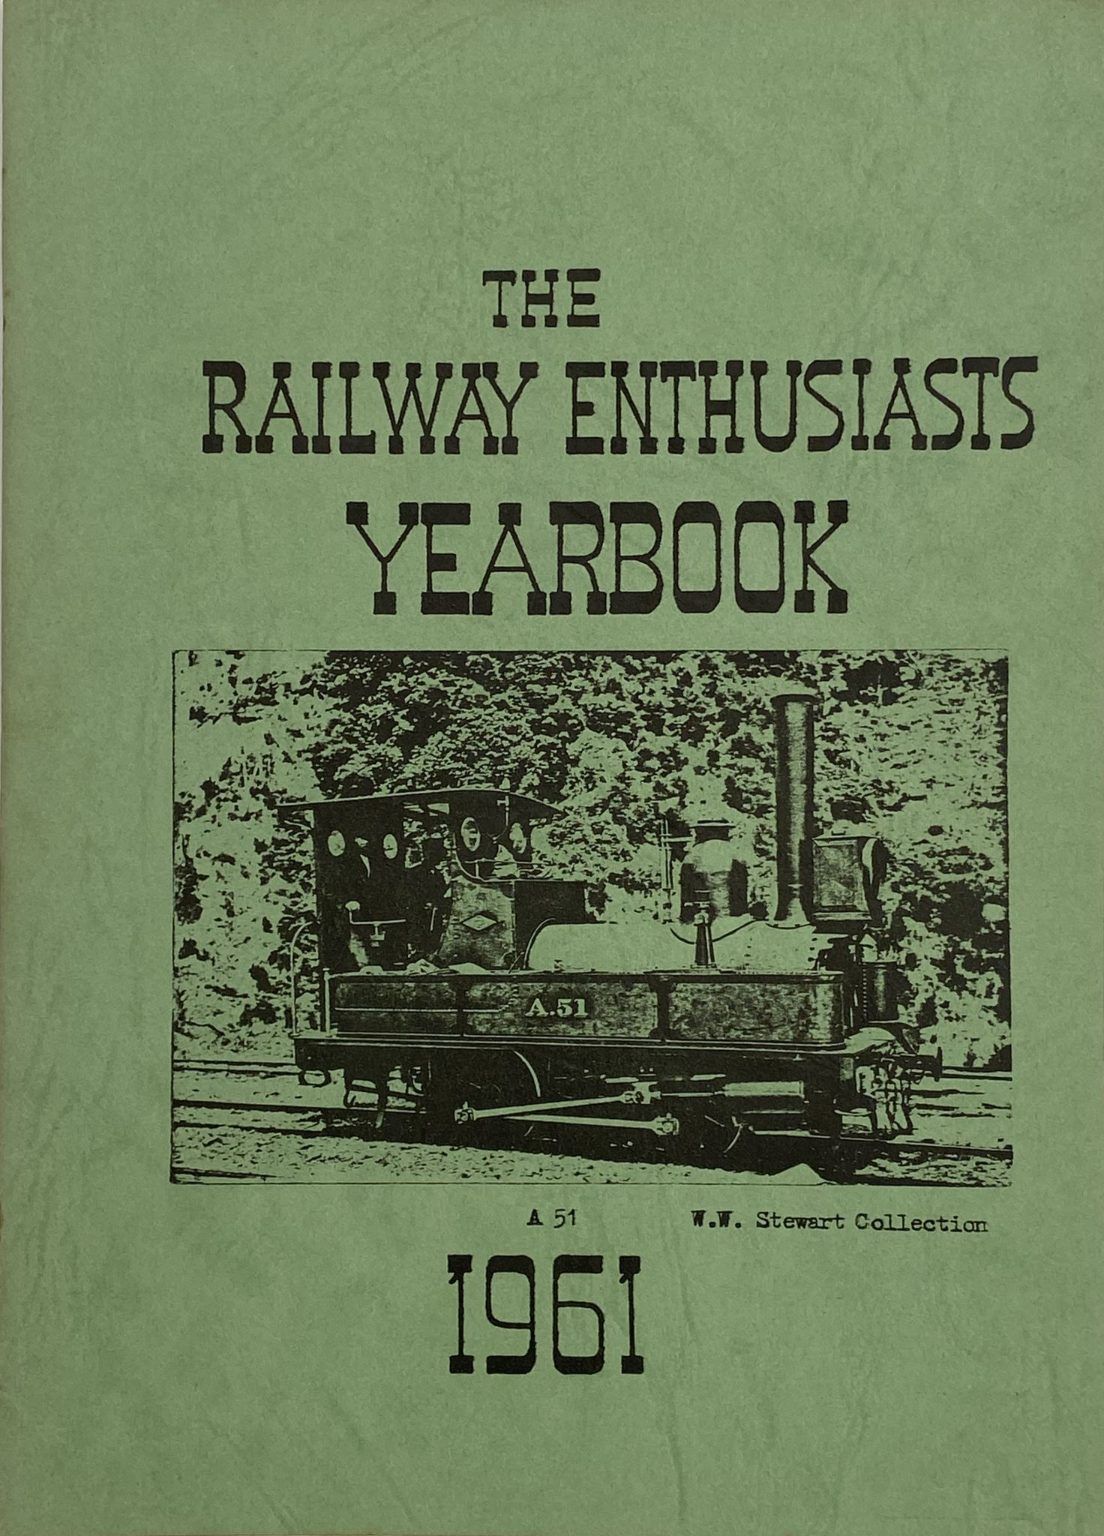 THE RAILWAY ENTHUSIASTS' YEARBOOK 1961